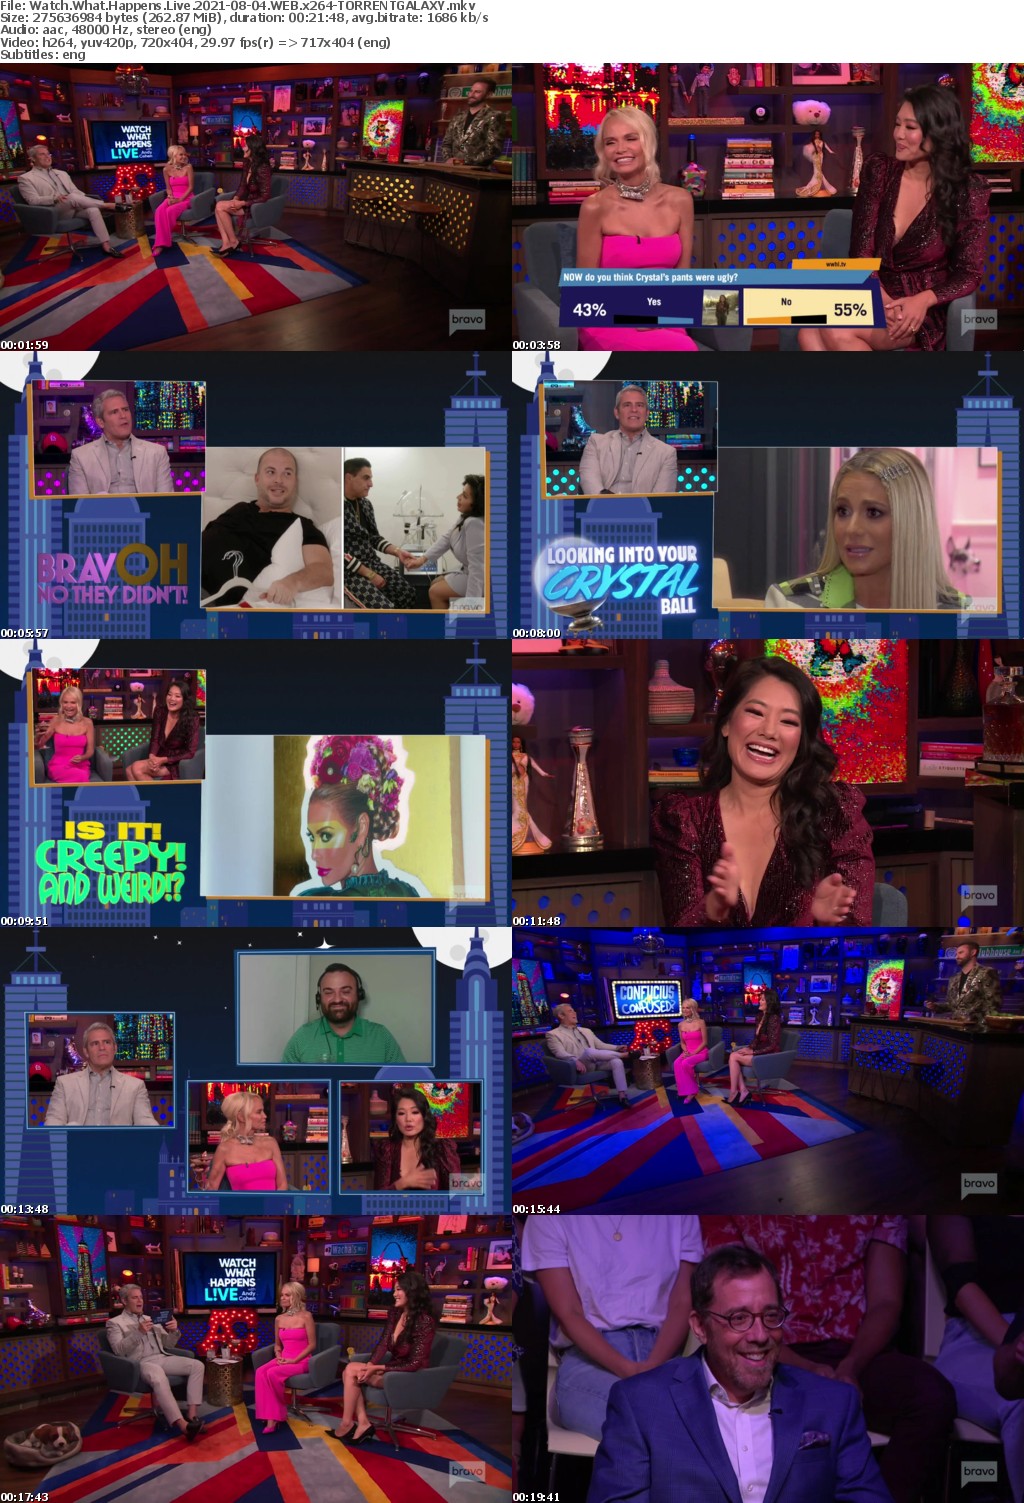 Watch What Happens Live 2021-08-04 WEB x264-GALAXY